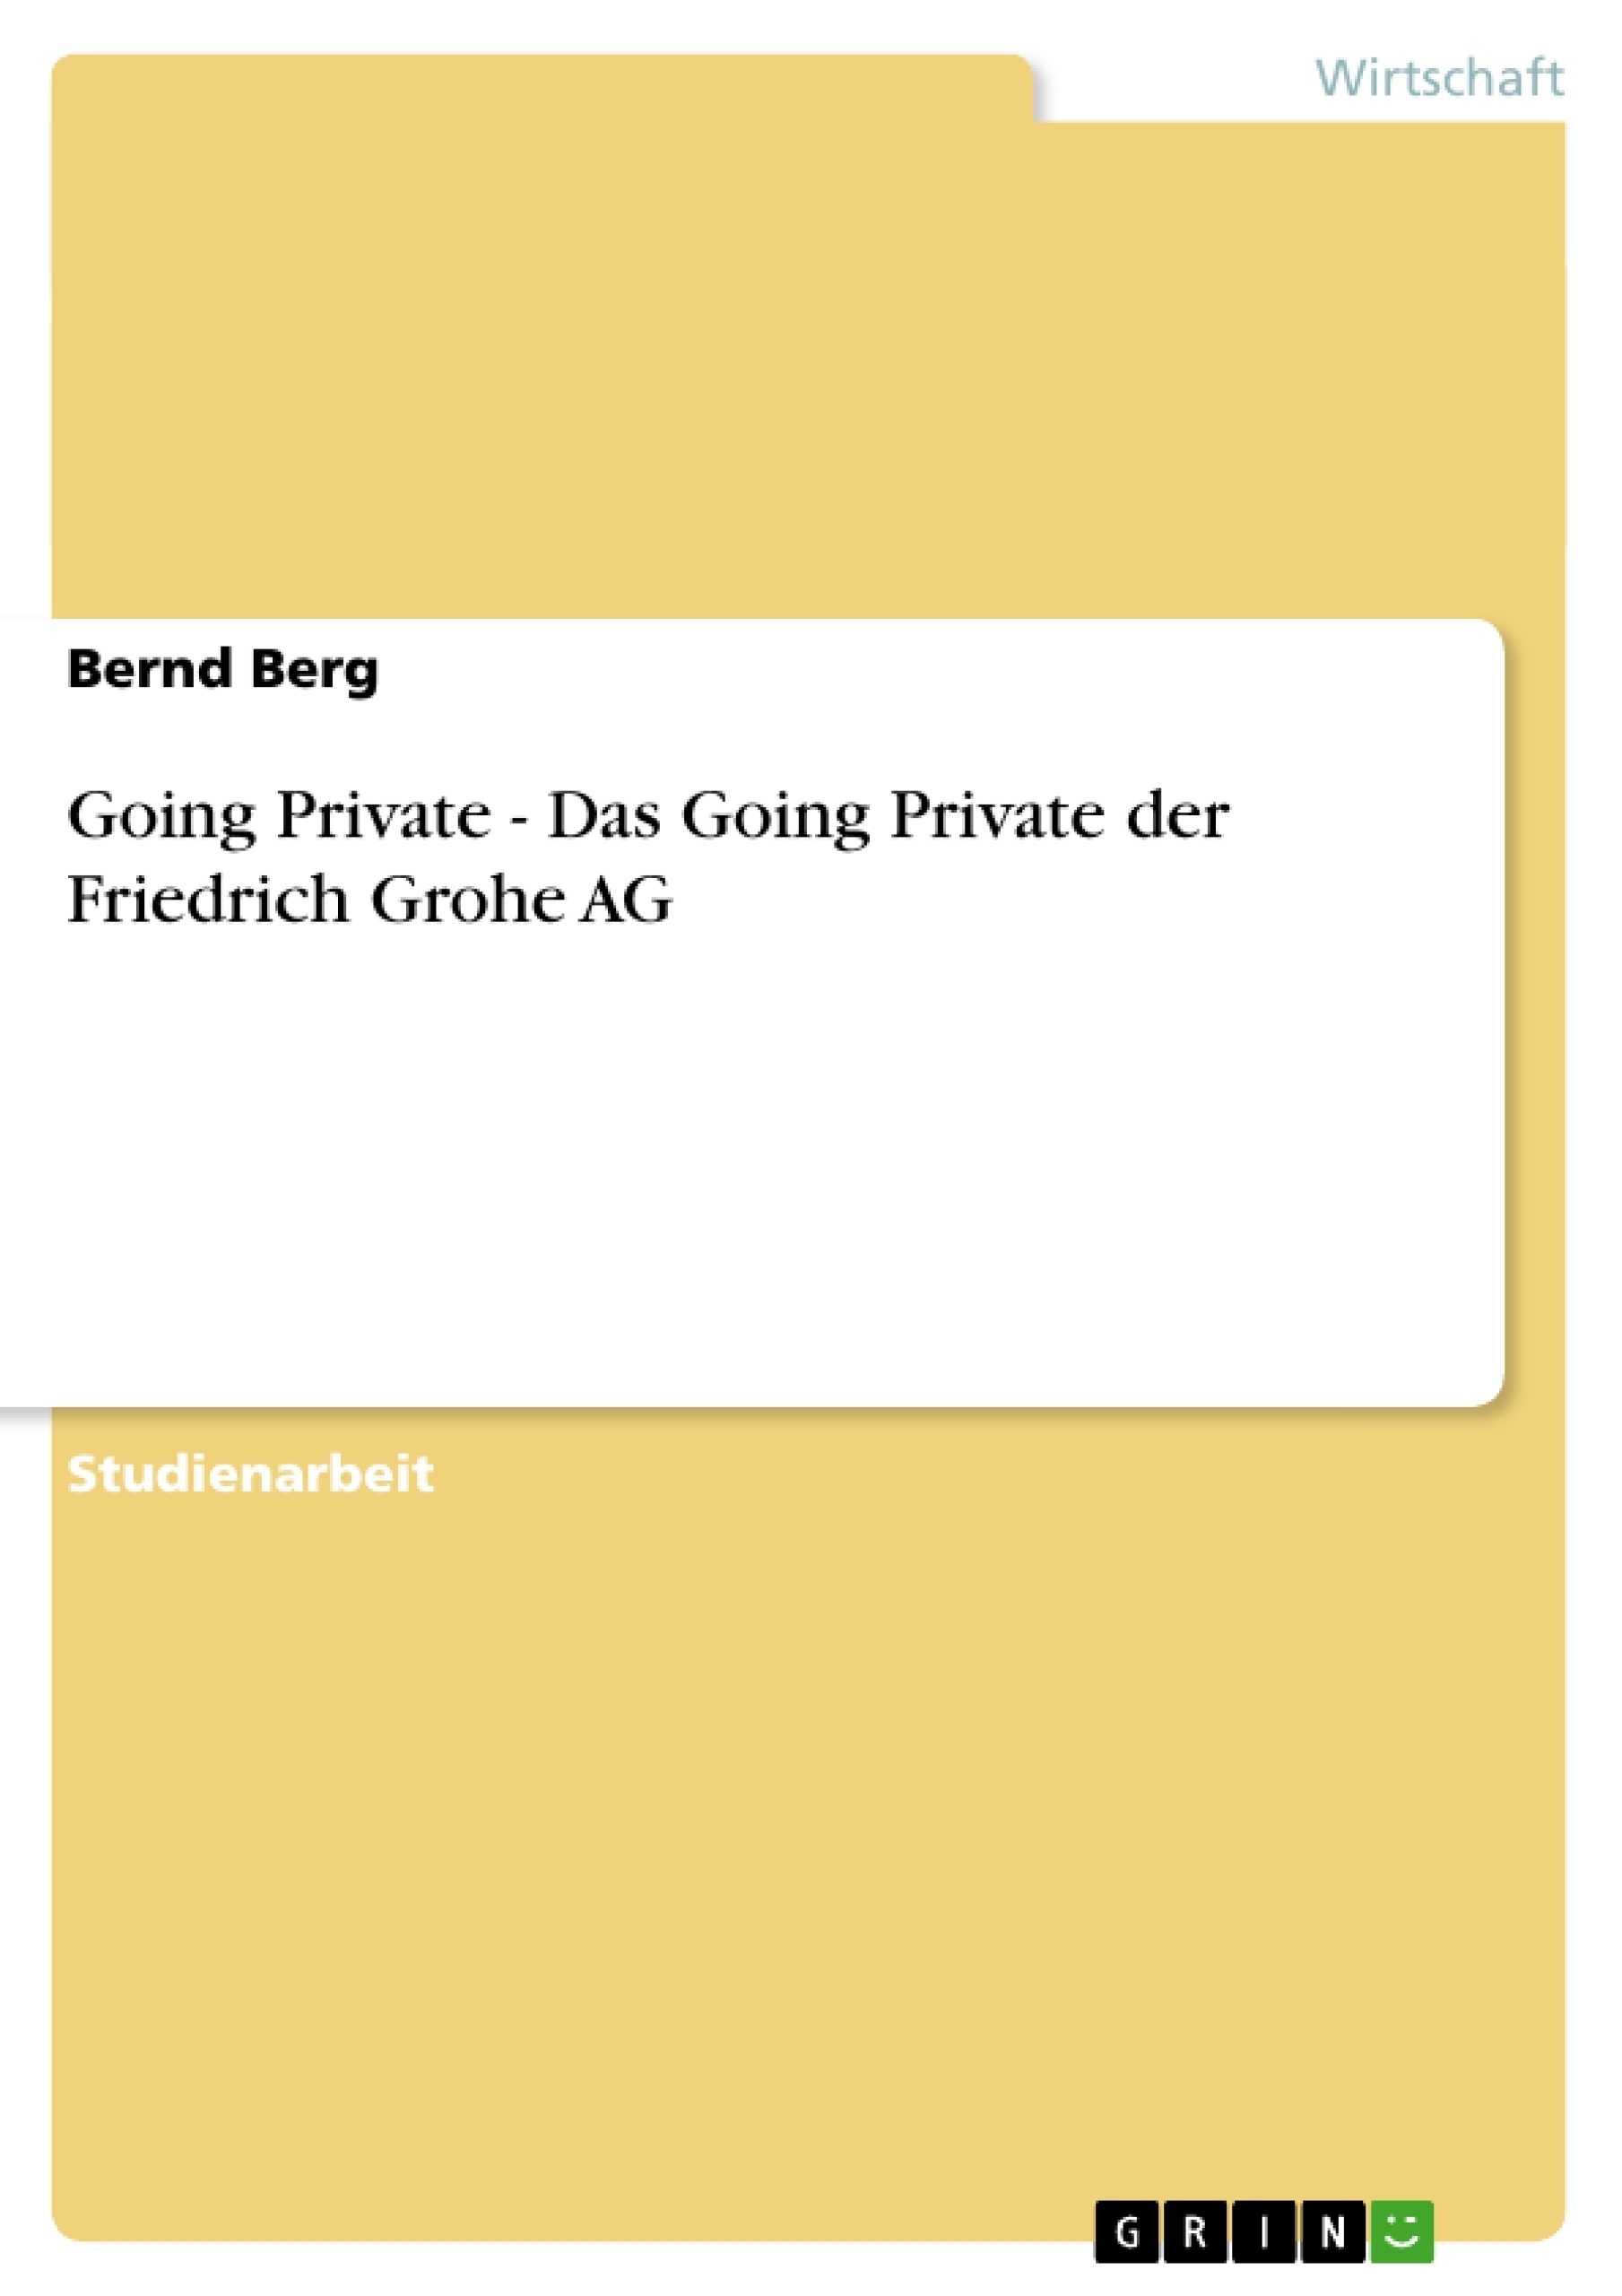 Titel: Going Private - Das Going Private der Friedrich Grohe AG